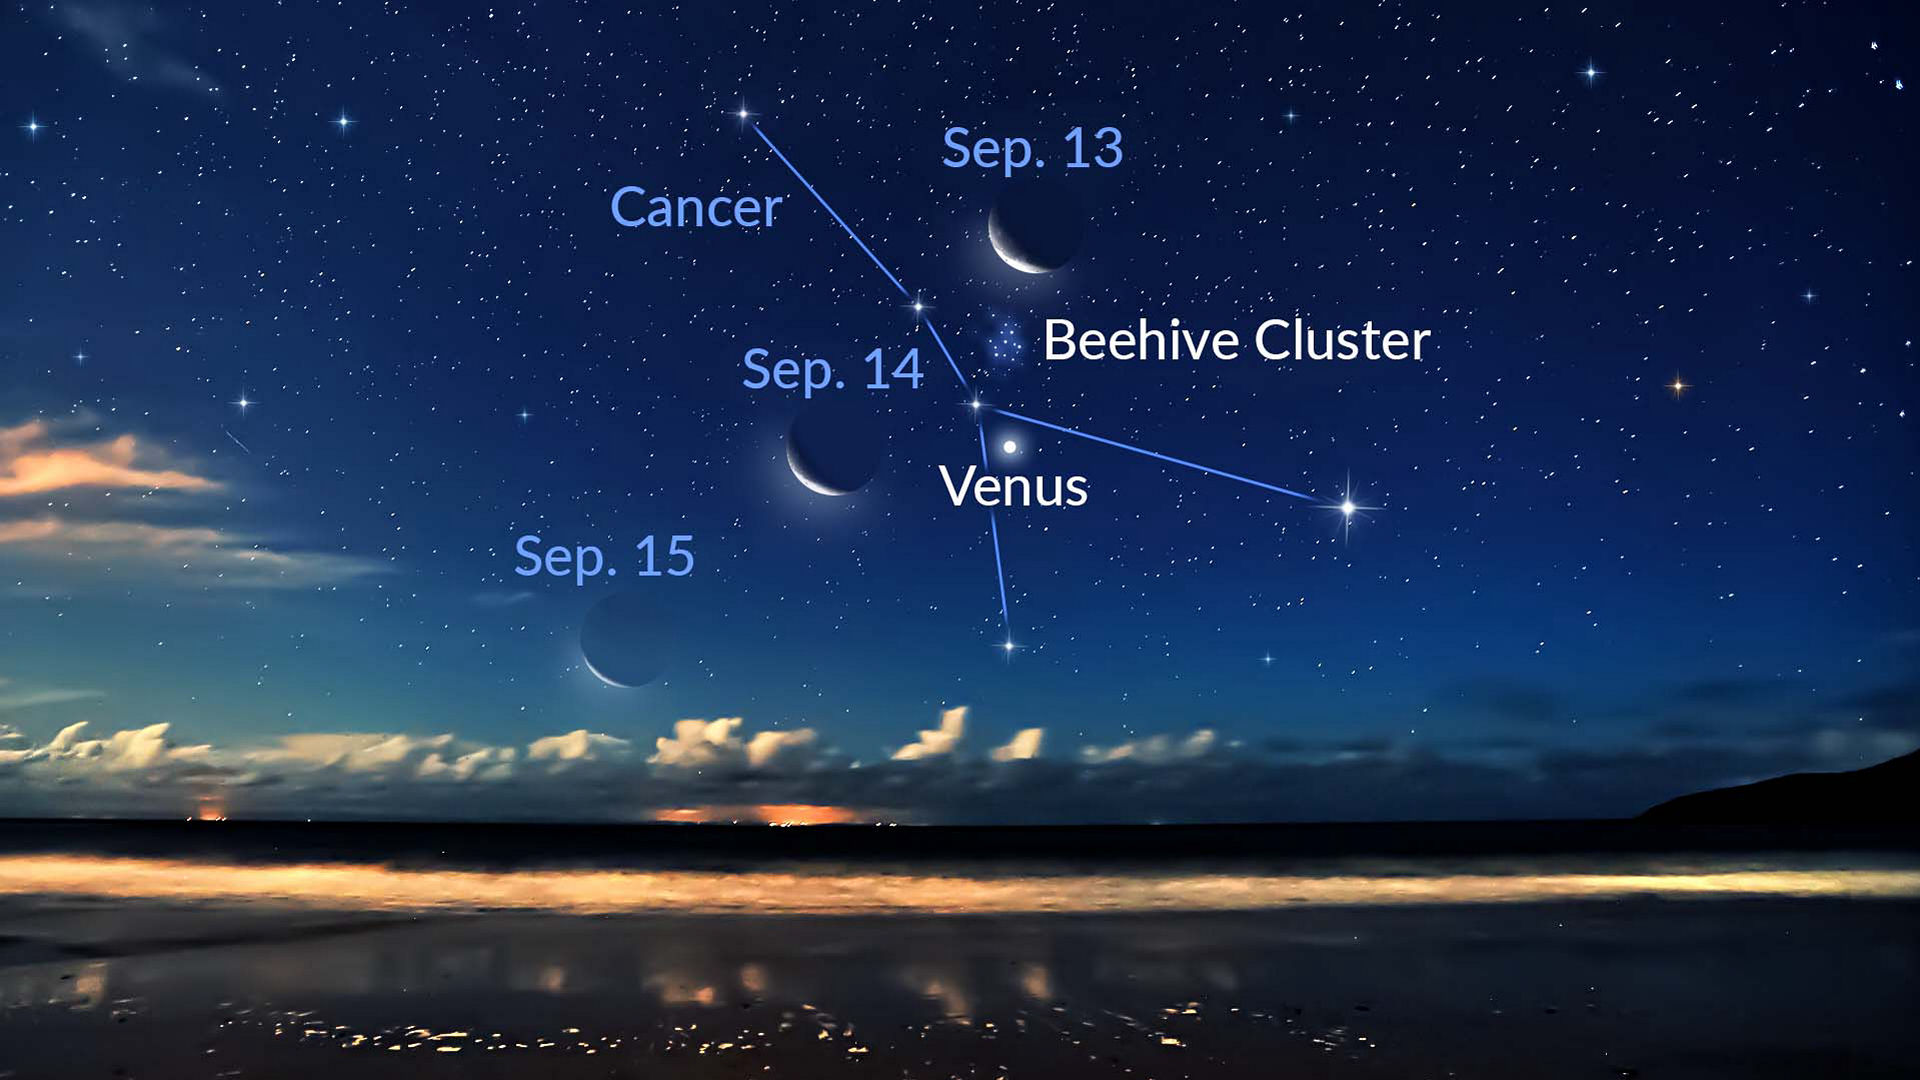 The Moon Shines Next to Venus and the Beehive Cluster